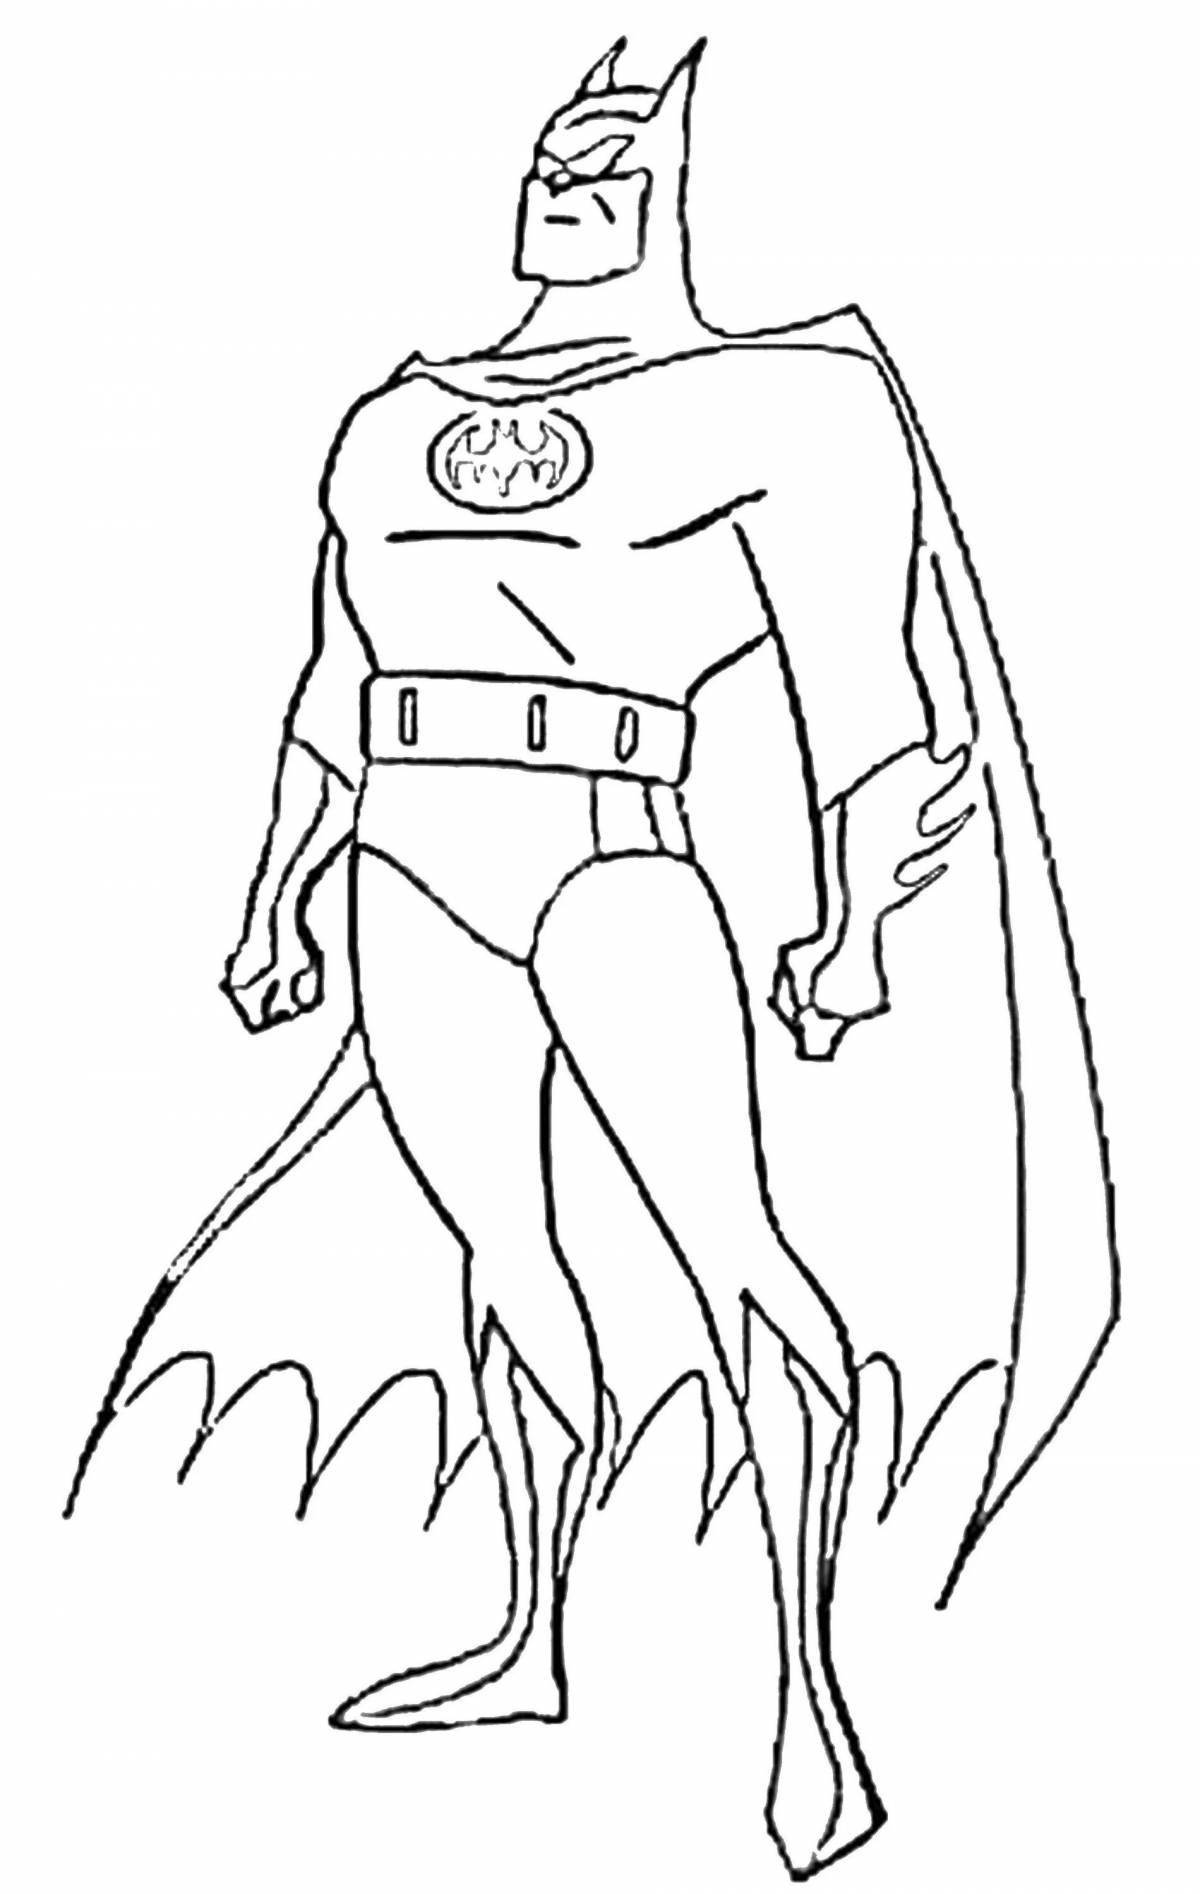 Funny superheroes coloring pages for kids 5-6 years old